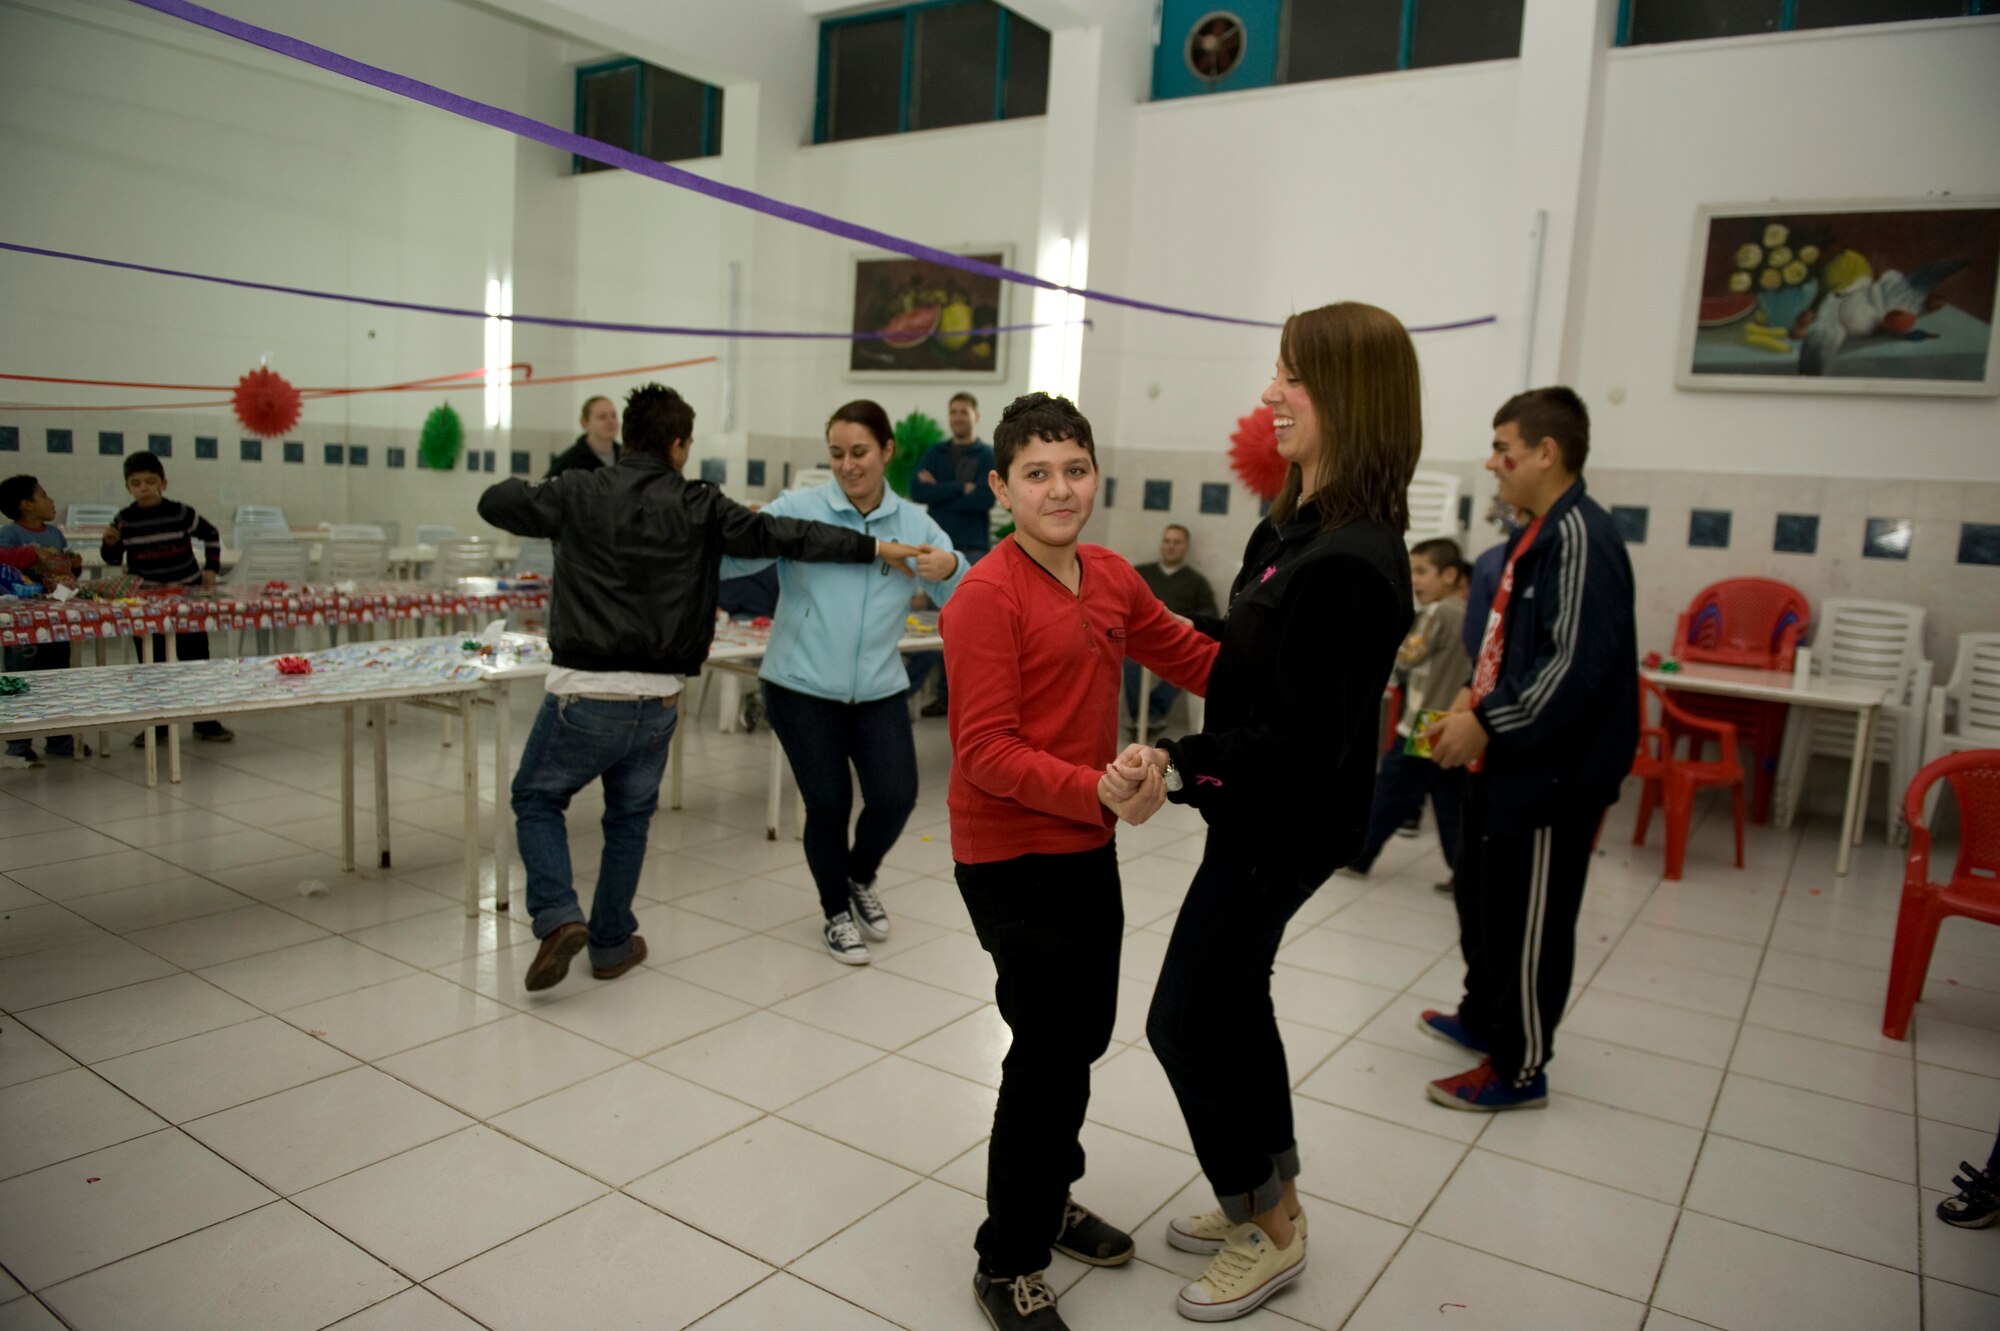 Airmen from the 90th Expeditionary Air Refueling Squadron dance with children at the Seyhan Isitme Engelliler Ilkogretim Okulu (Seyhan Hearing Impaired Primary School) Dec. 27, 2012, in Adana, Turkey. Members of the 90th EARS annually organize a party for children who attend the Seyhan School and also volunteer weekly at facilities in Adana to contribute to the community. (U.S. Air Force photo by Staff Sgt. Marissa Tucker/Released)